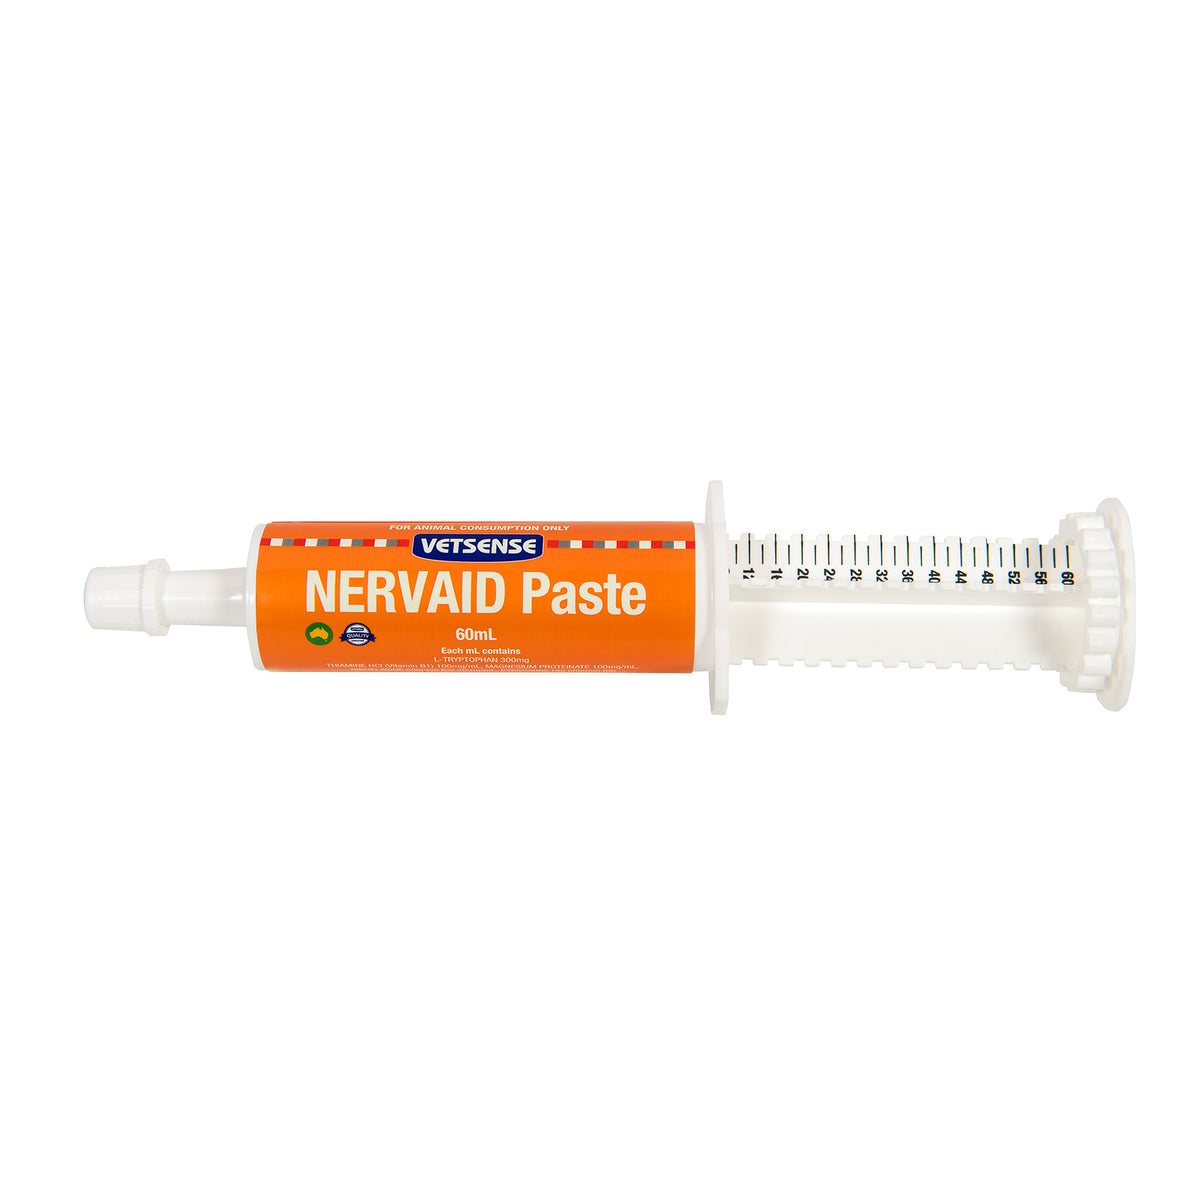 Nervaid Paste Nutritional Supplement 60mL